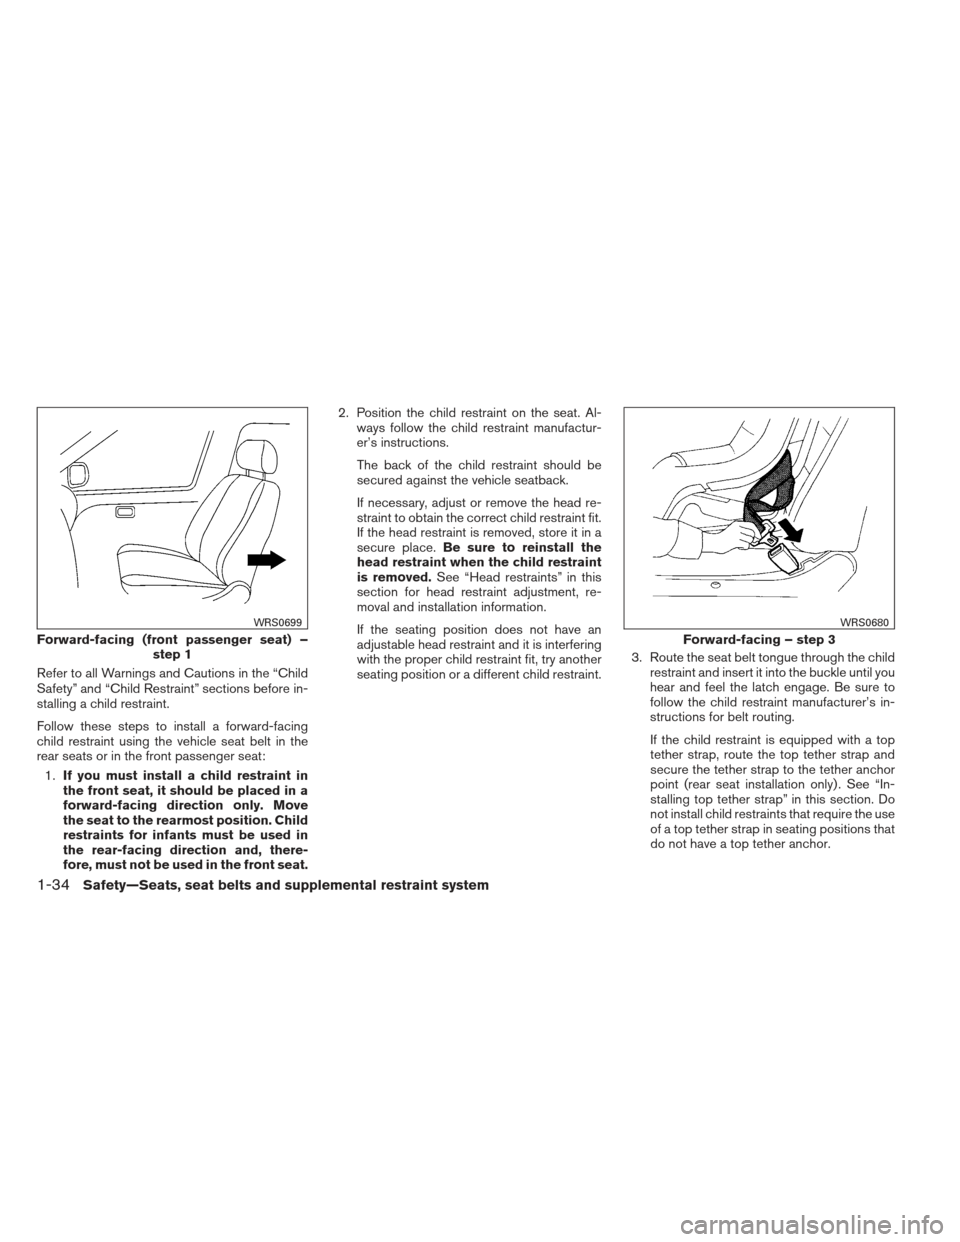 NISSAN ALTIMA COUPE 2012 D32 / 4.G Workshop Manual Refer to all Warnings and Cautions in the “Child
Safety” and “Child Restraint” sections before in-
stalling a child restraint.
Follow these steps to install a forward-facing
child restraint us